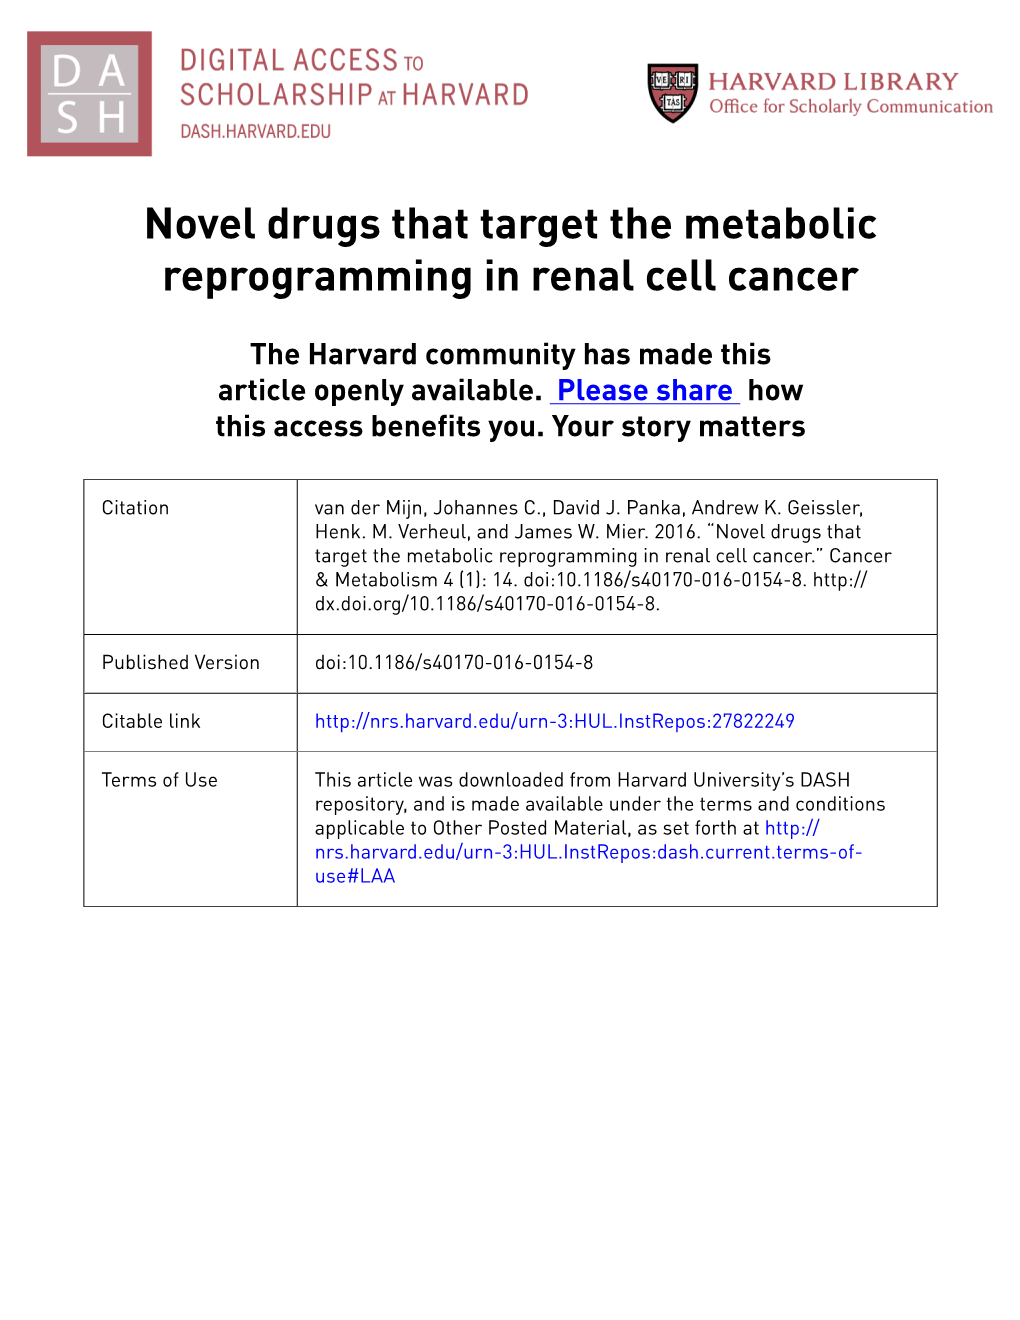 Novel Drugs That Target the Metabolic Reprogramming in Renal Cell Cancer